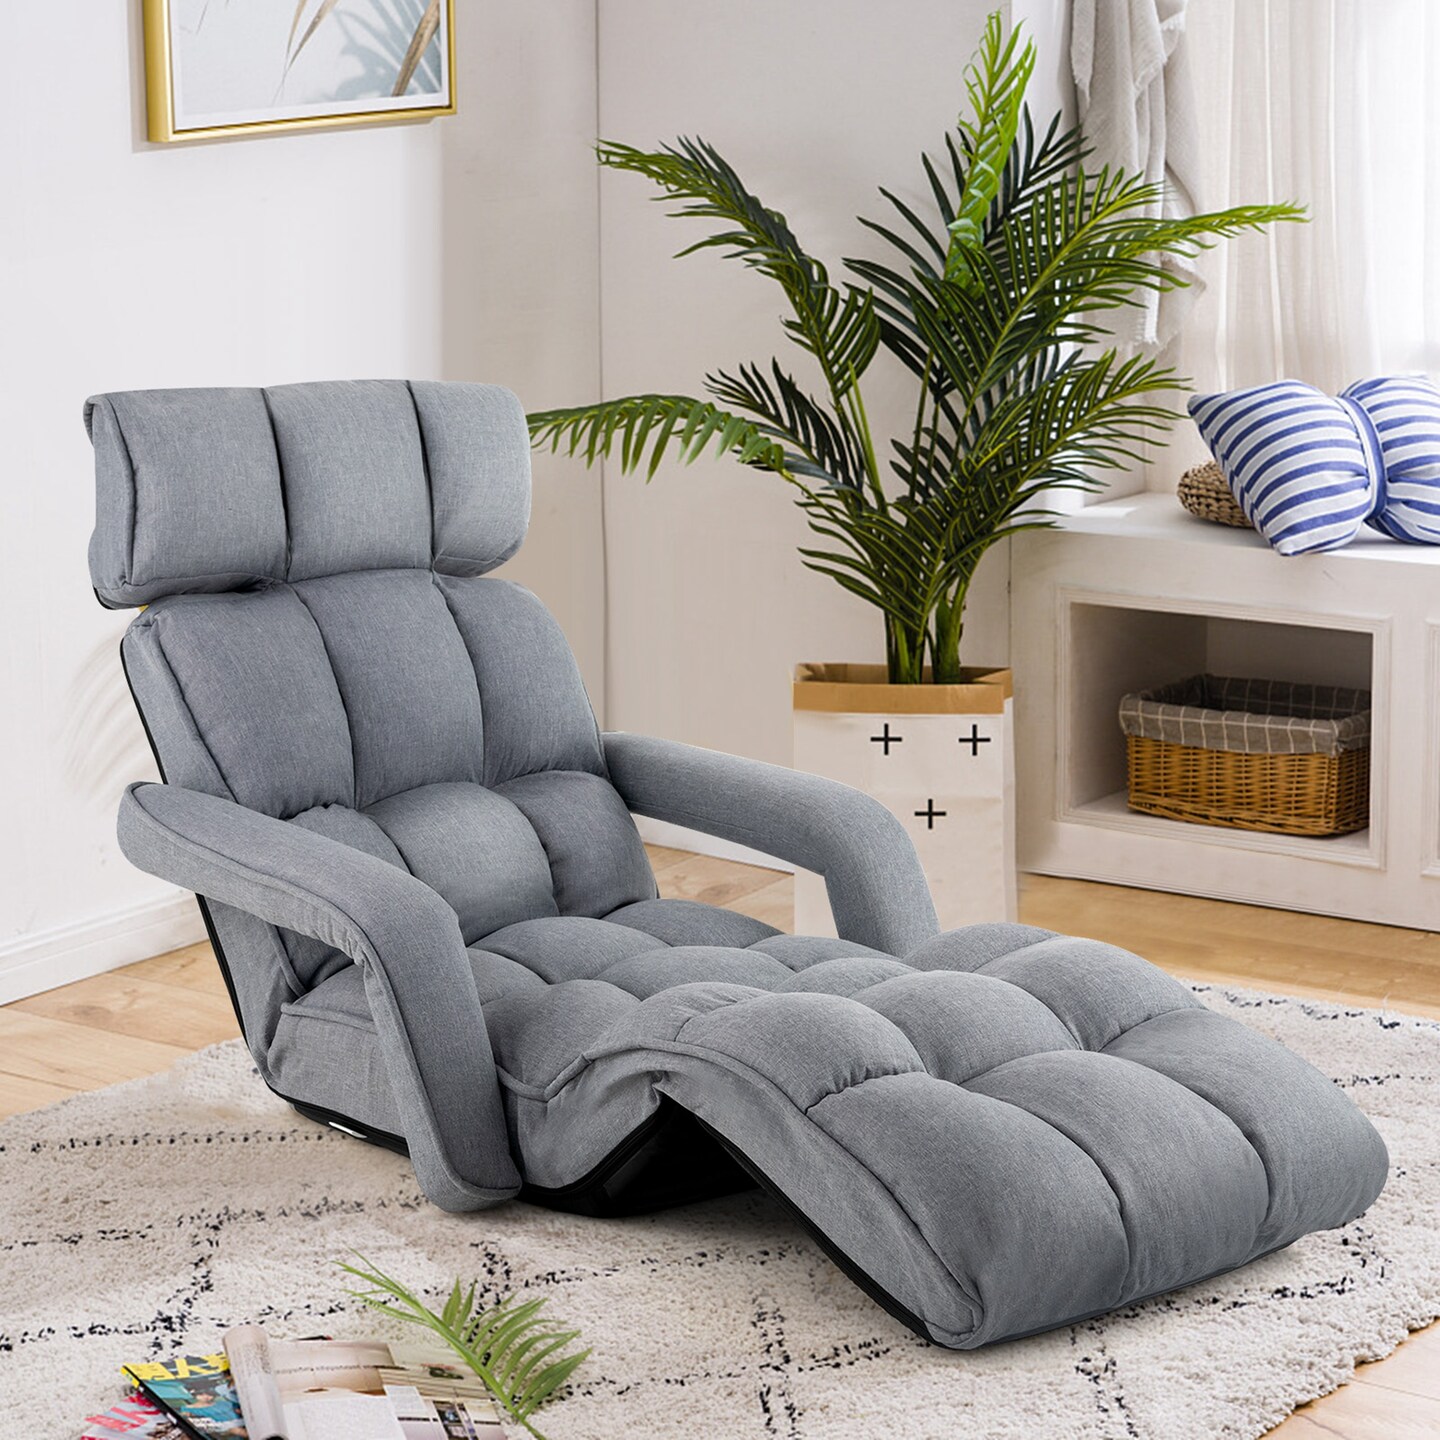 Costway 6-Position Adjustable Floor Chair for Adults Foldable Lazy Sofa for Living Room